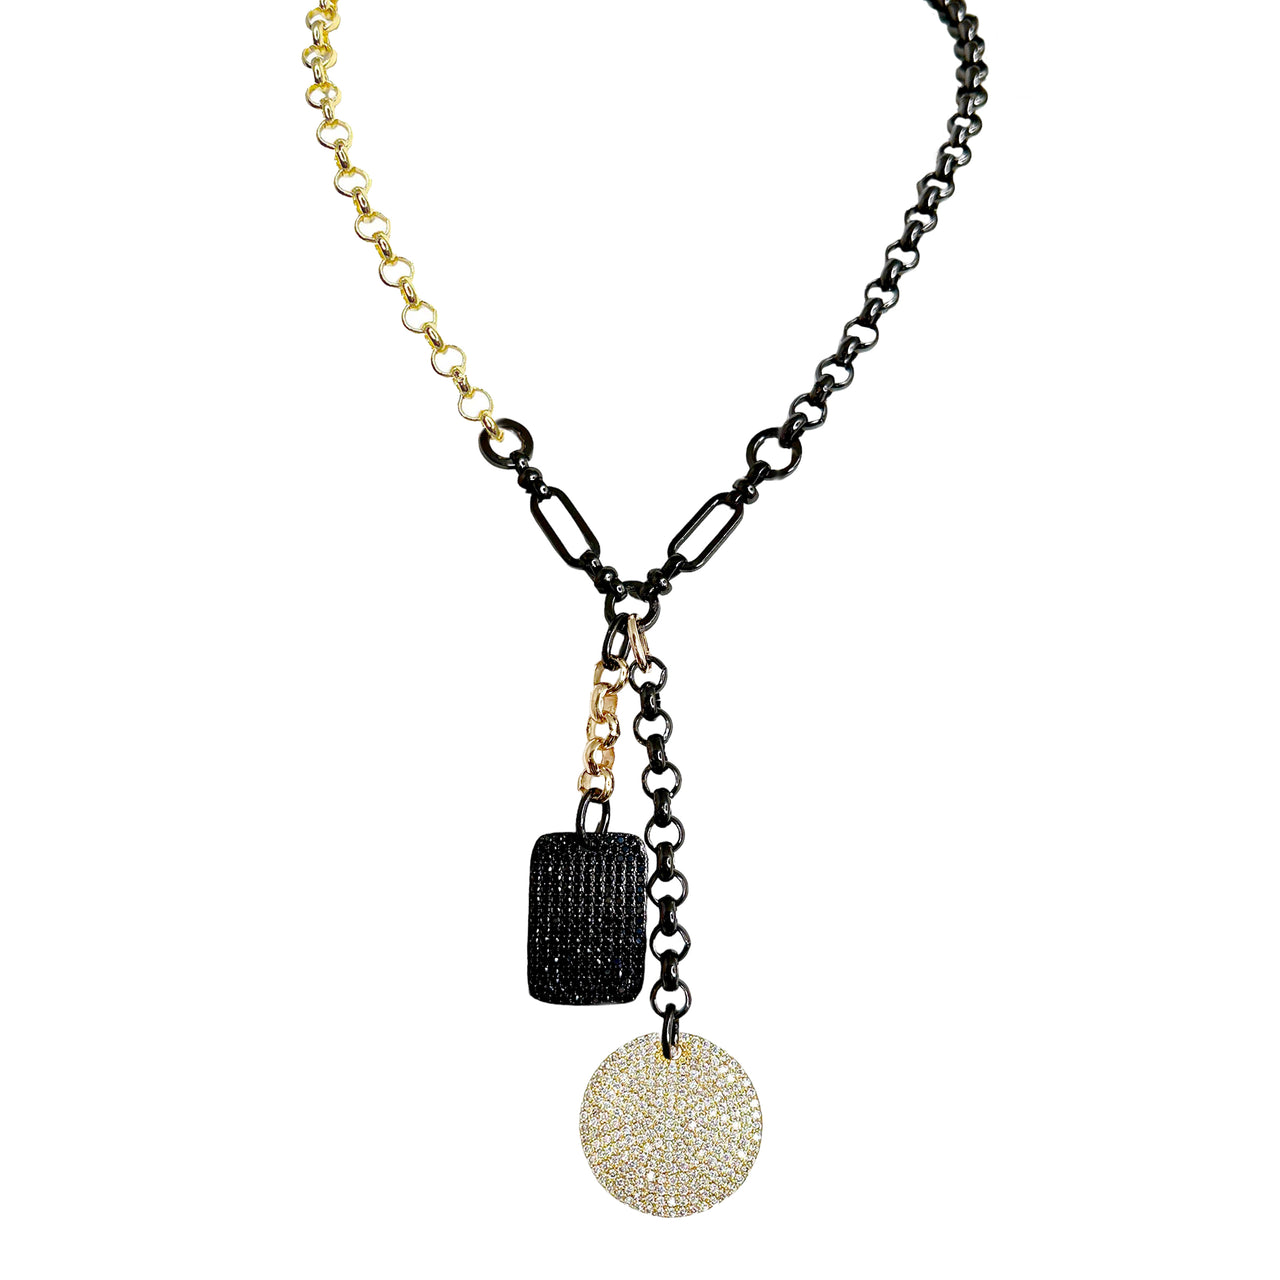 Maxine AH-MAZING Dog Tag Disc Necklace